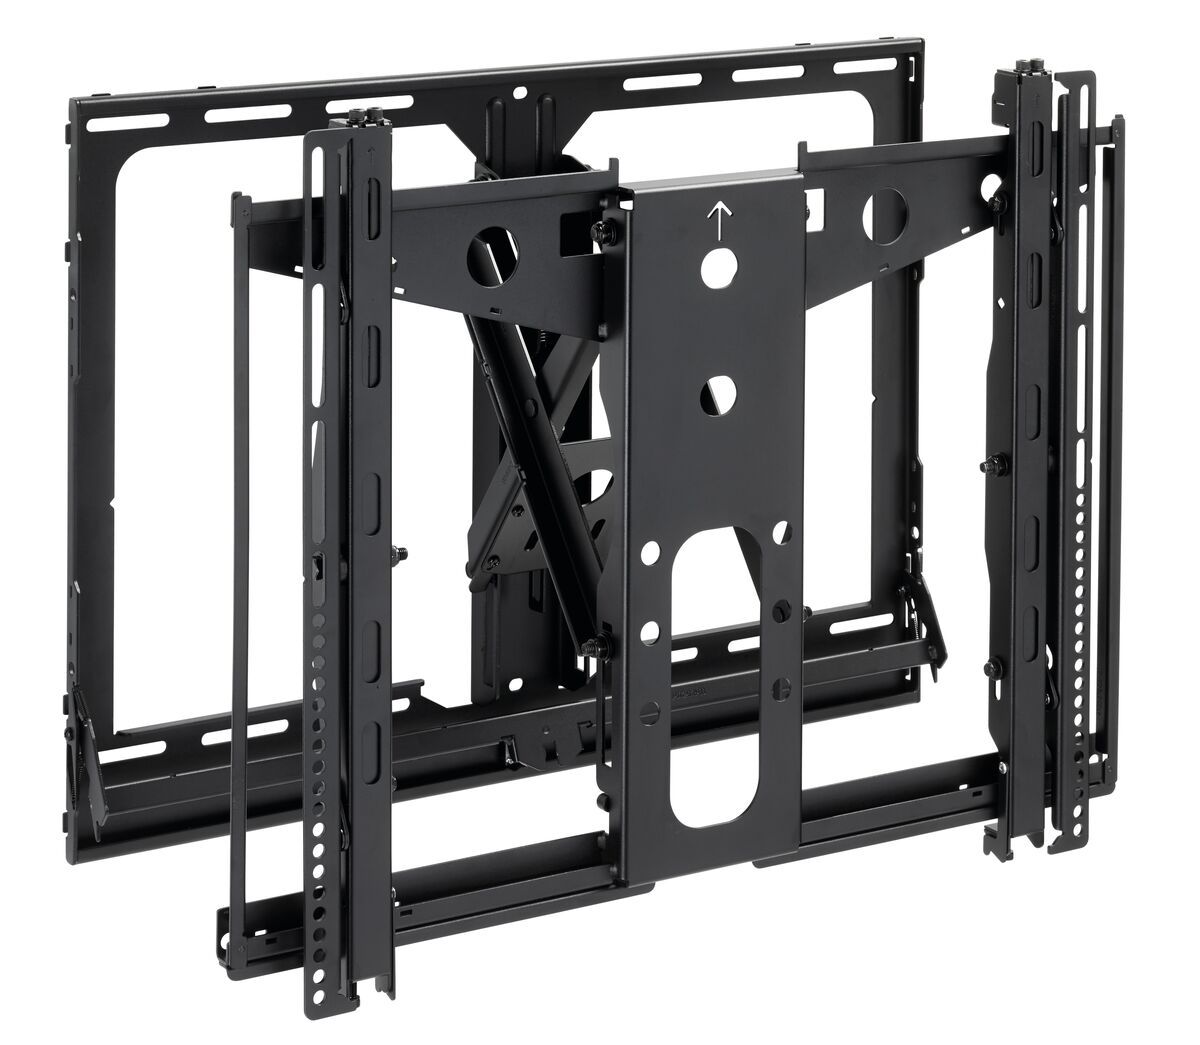 Vogel's - PFW 6880 Video Wall Pop-Out Mount